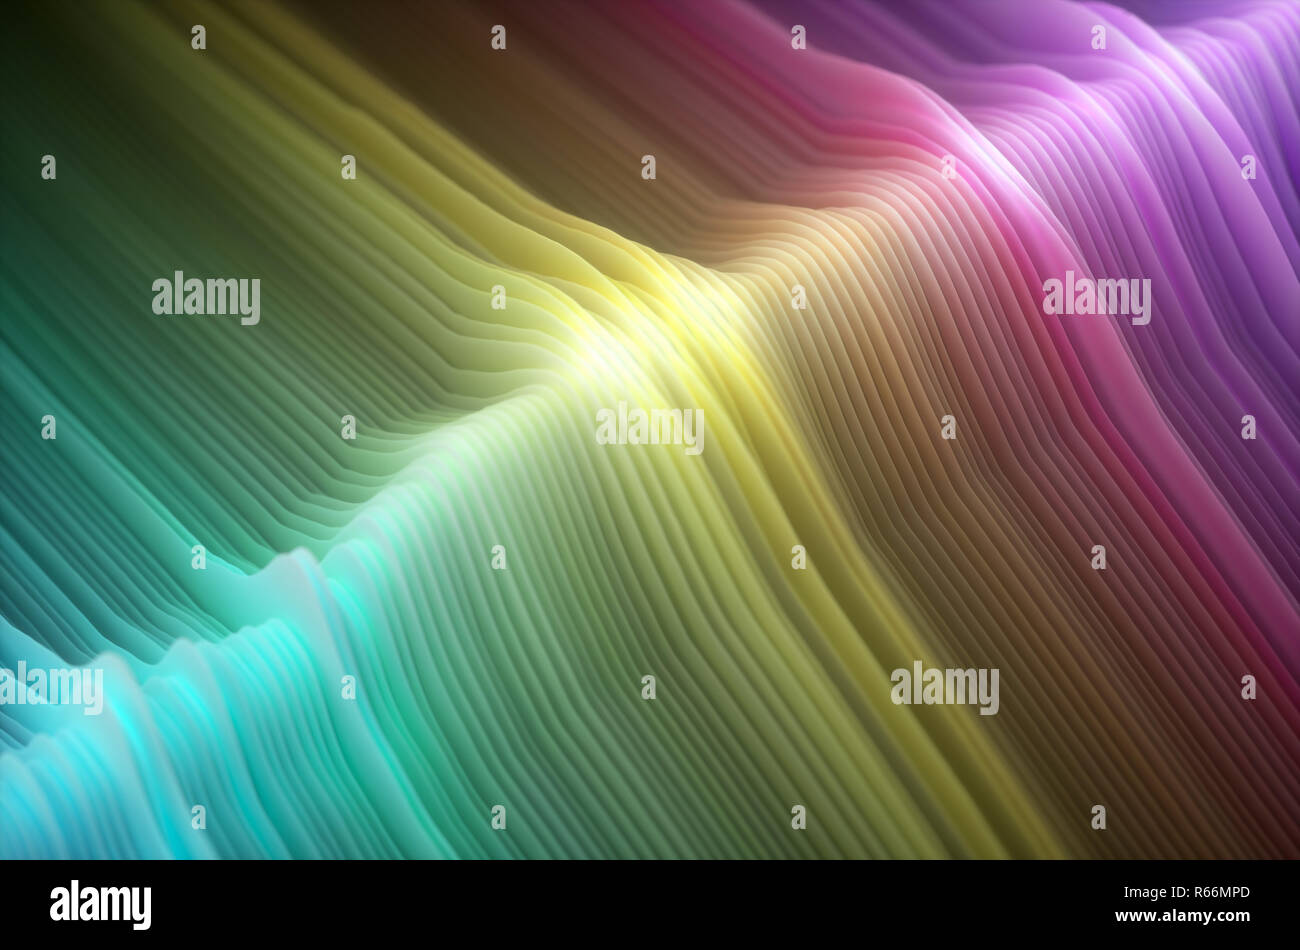 Colorful Embossed Abstract Background Stock Photo